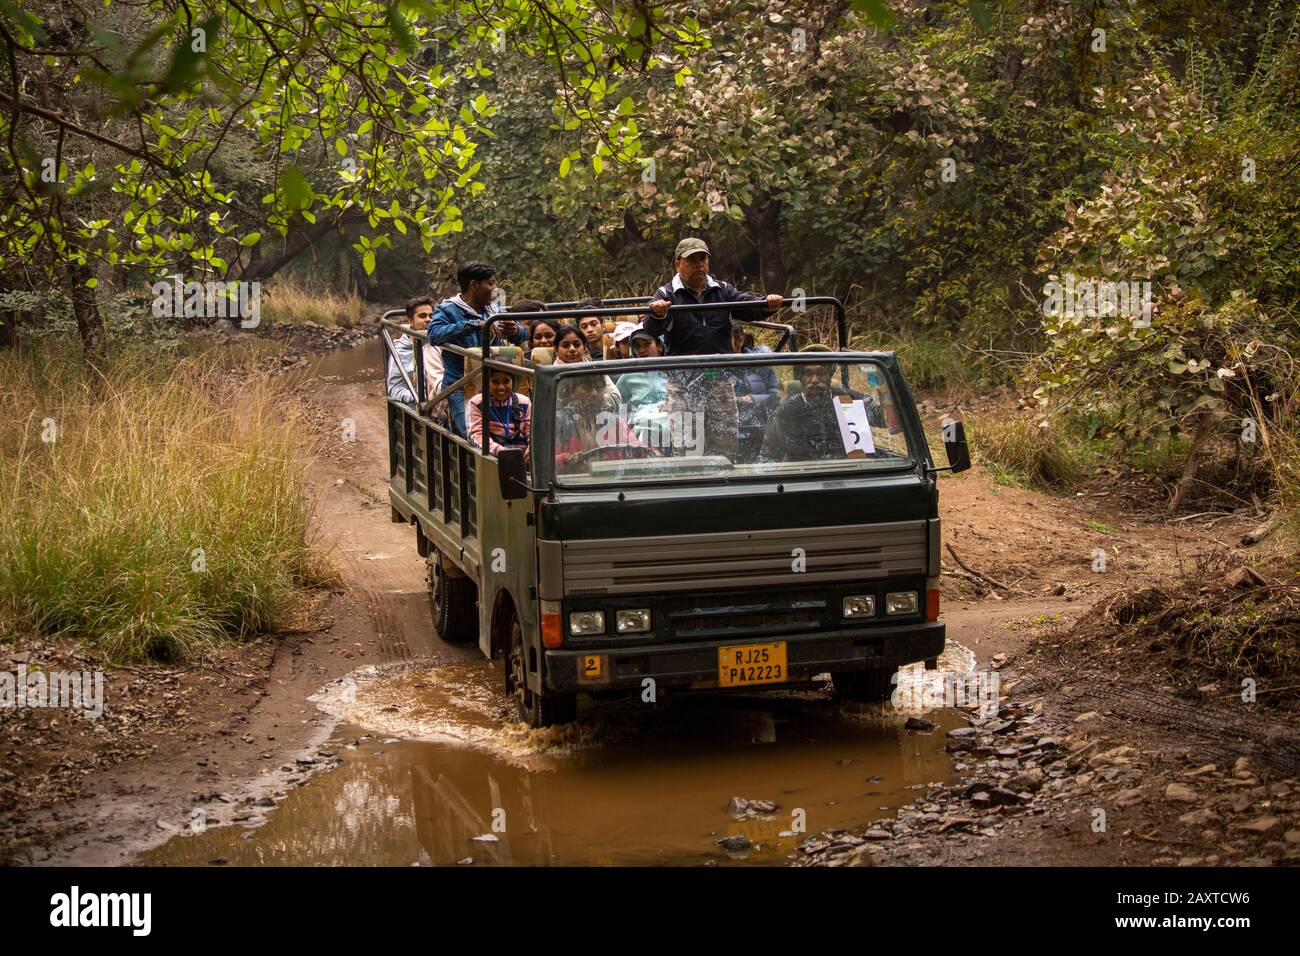 India, Rajasthan, Ranthambhore, National Park, Zone 2, Canter truck full of Indian tourists on afternoon safari Stock Photo